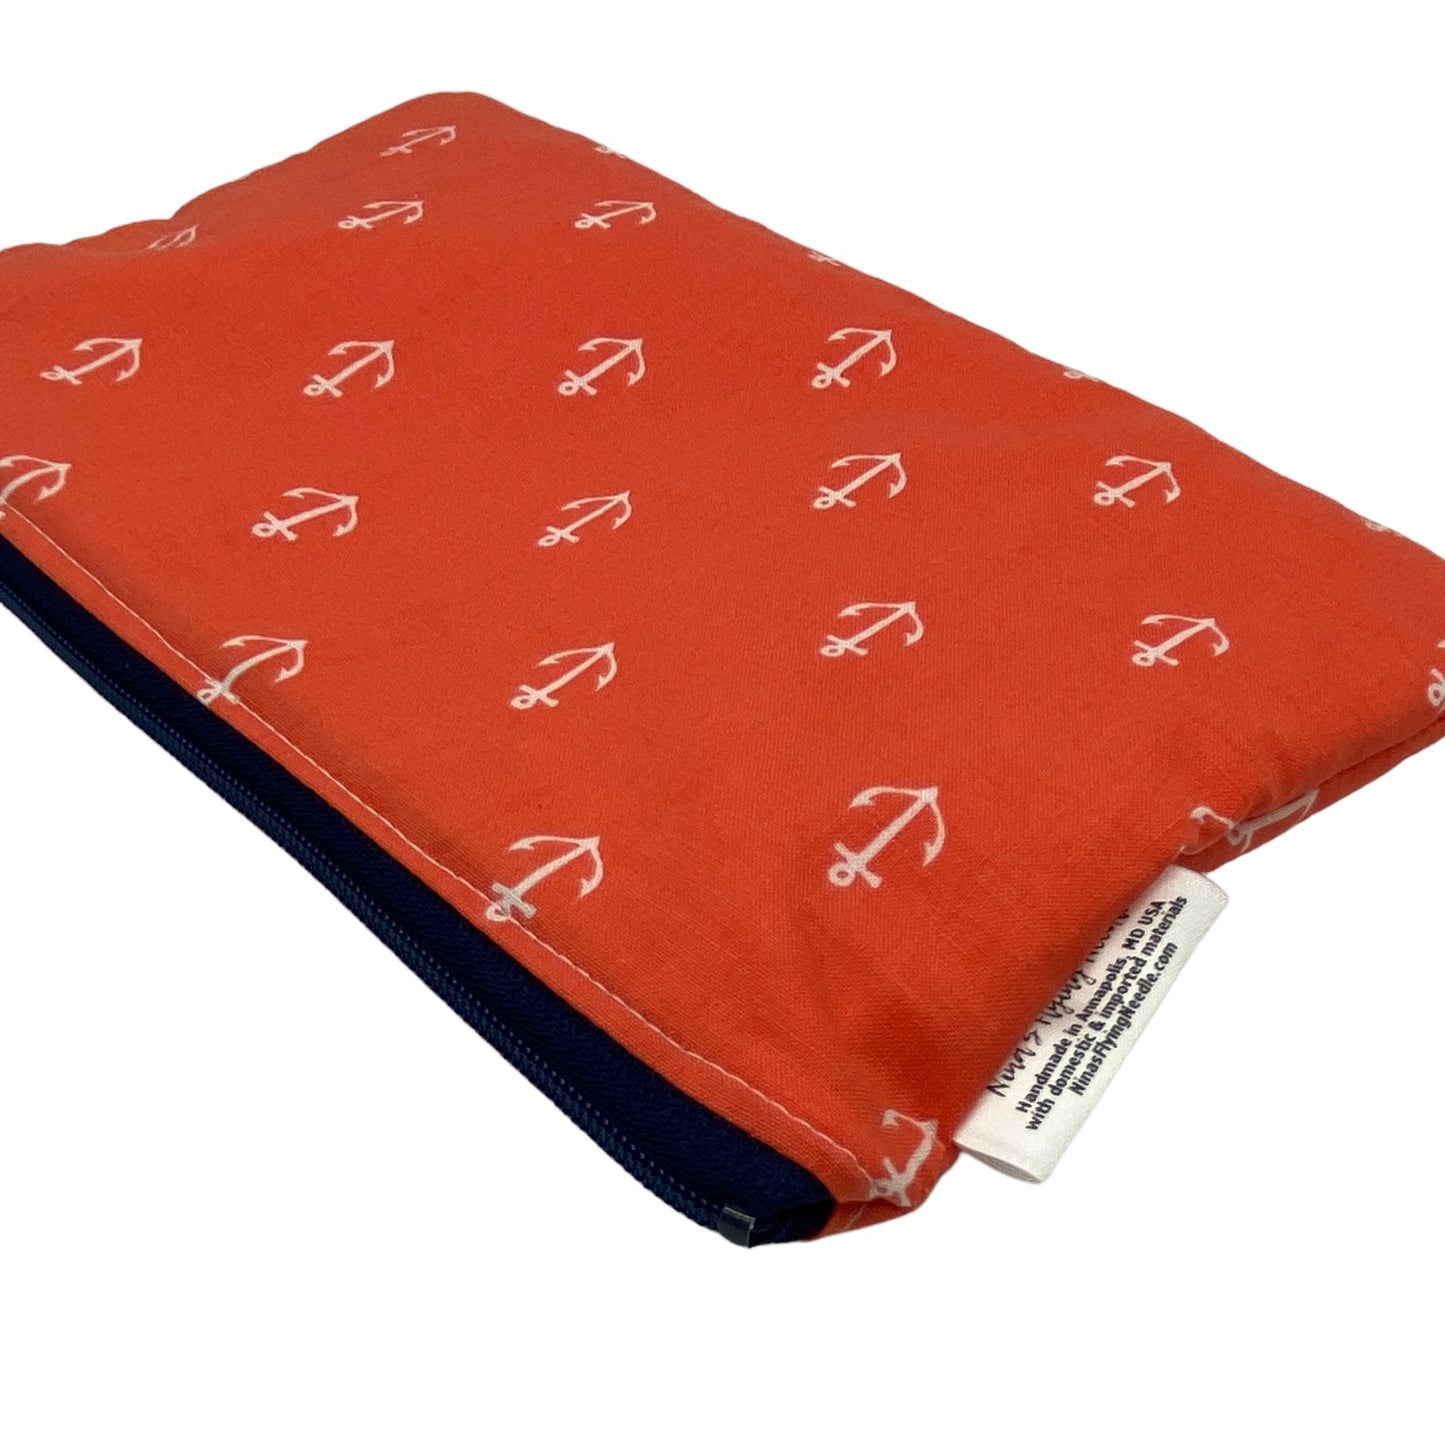 Snack Sized Reusable Zippered Bag Anchors on Orange